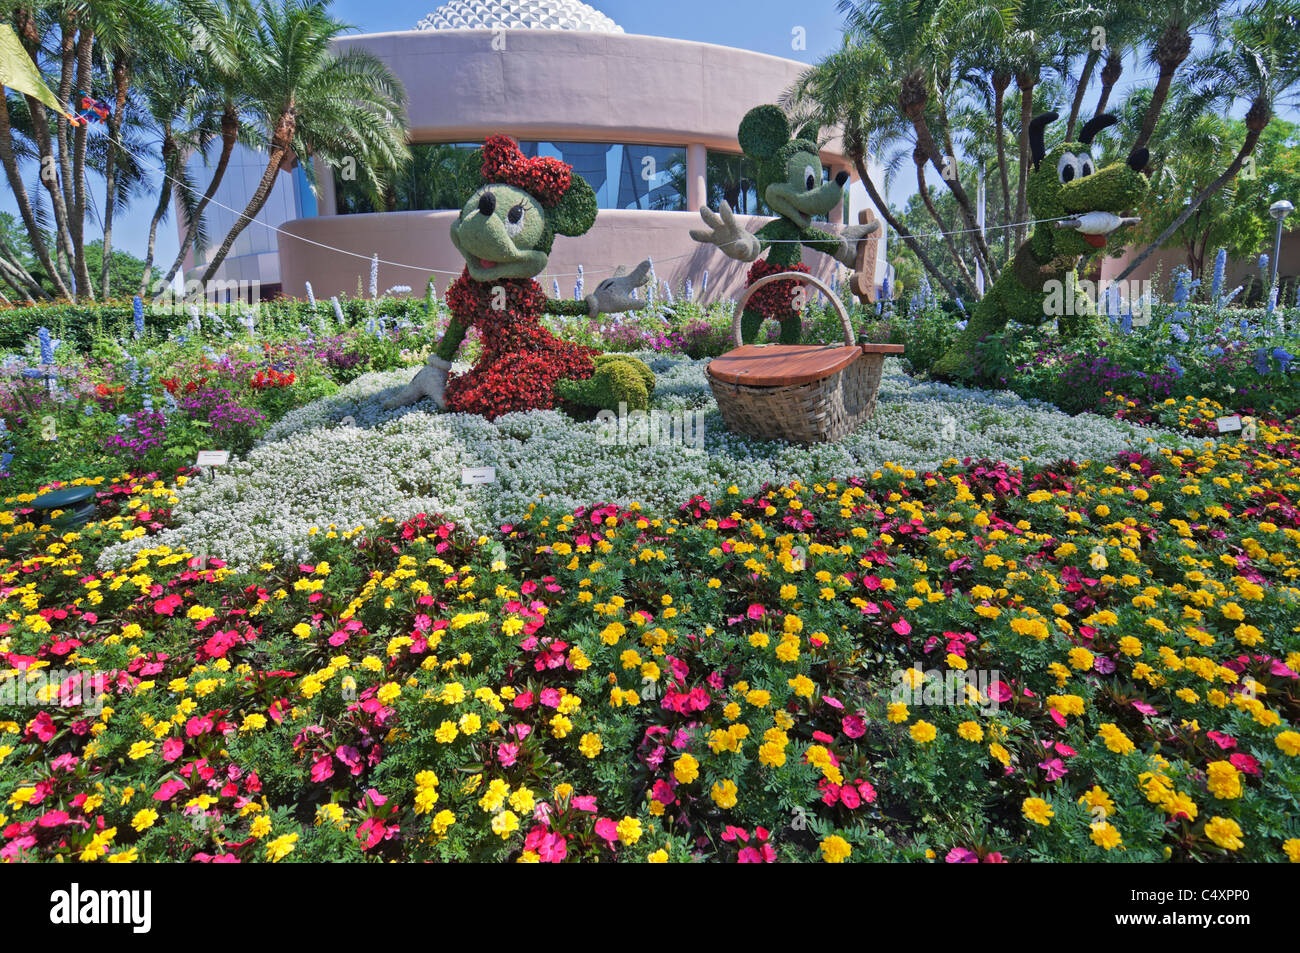 Epcot Center Orlando Florida topiaries of Mickey and Minnie Mouse and Pluto at the annual flower & garden festival Stock Photo